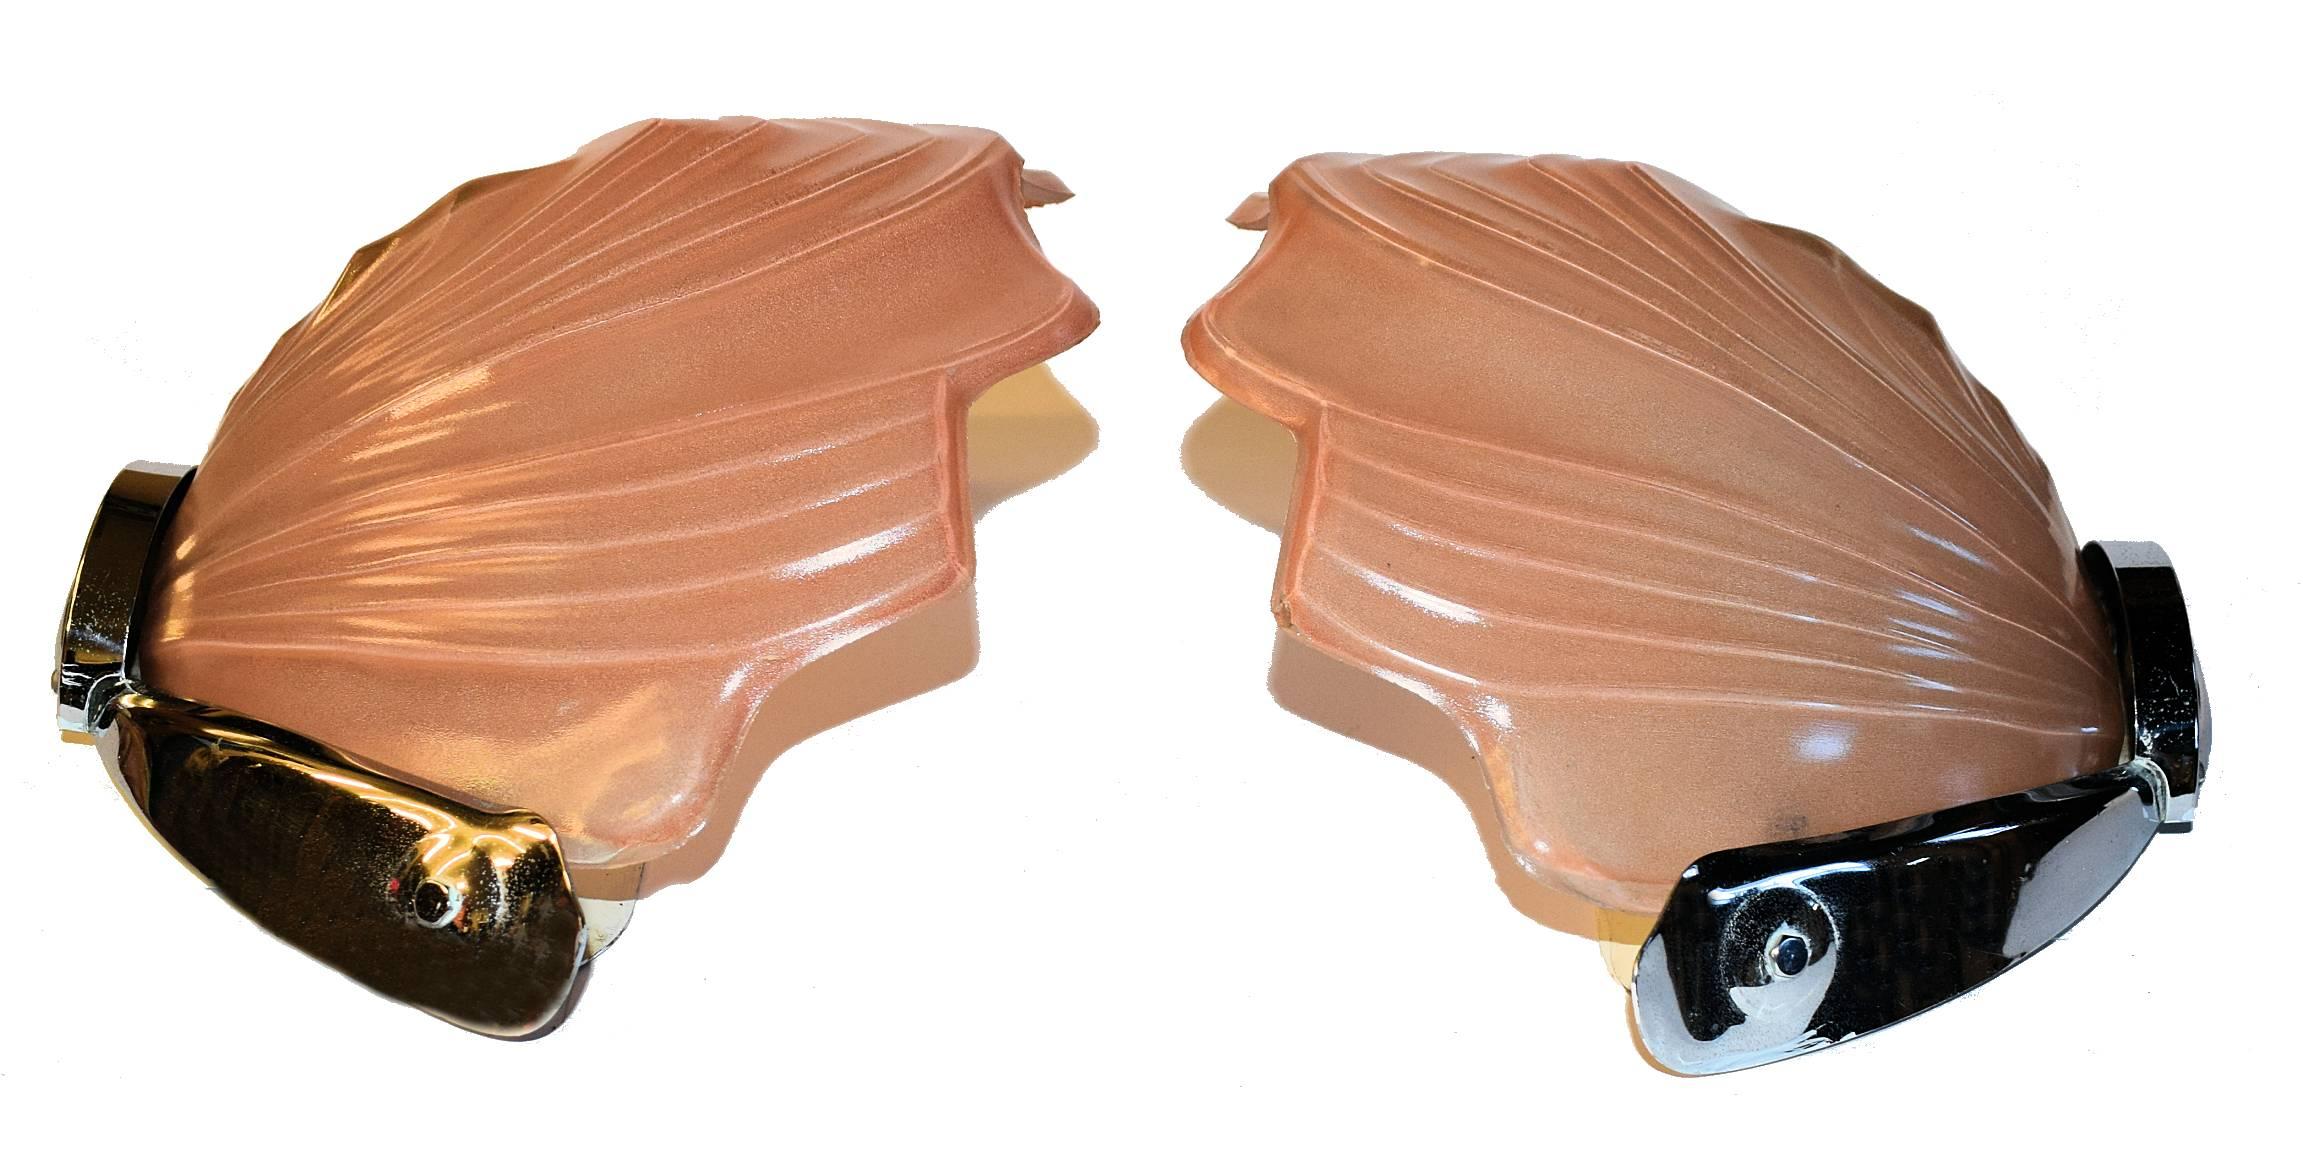 Superbly stylish matching pair of 1930s Art Deco soft salmon pink Petal Wall Lights, in excellent condition with minimal signs of age. The back plates are highly polished chrome which contrasts beautifully with the glass shades. This particular